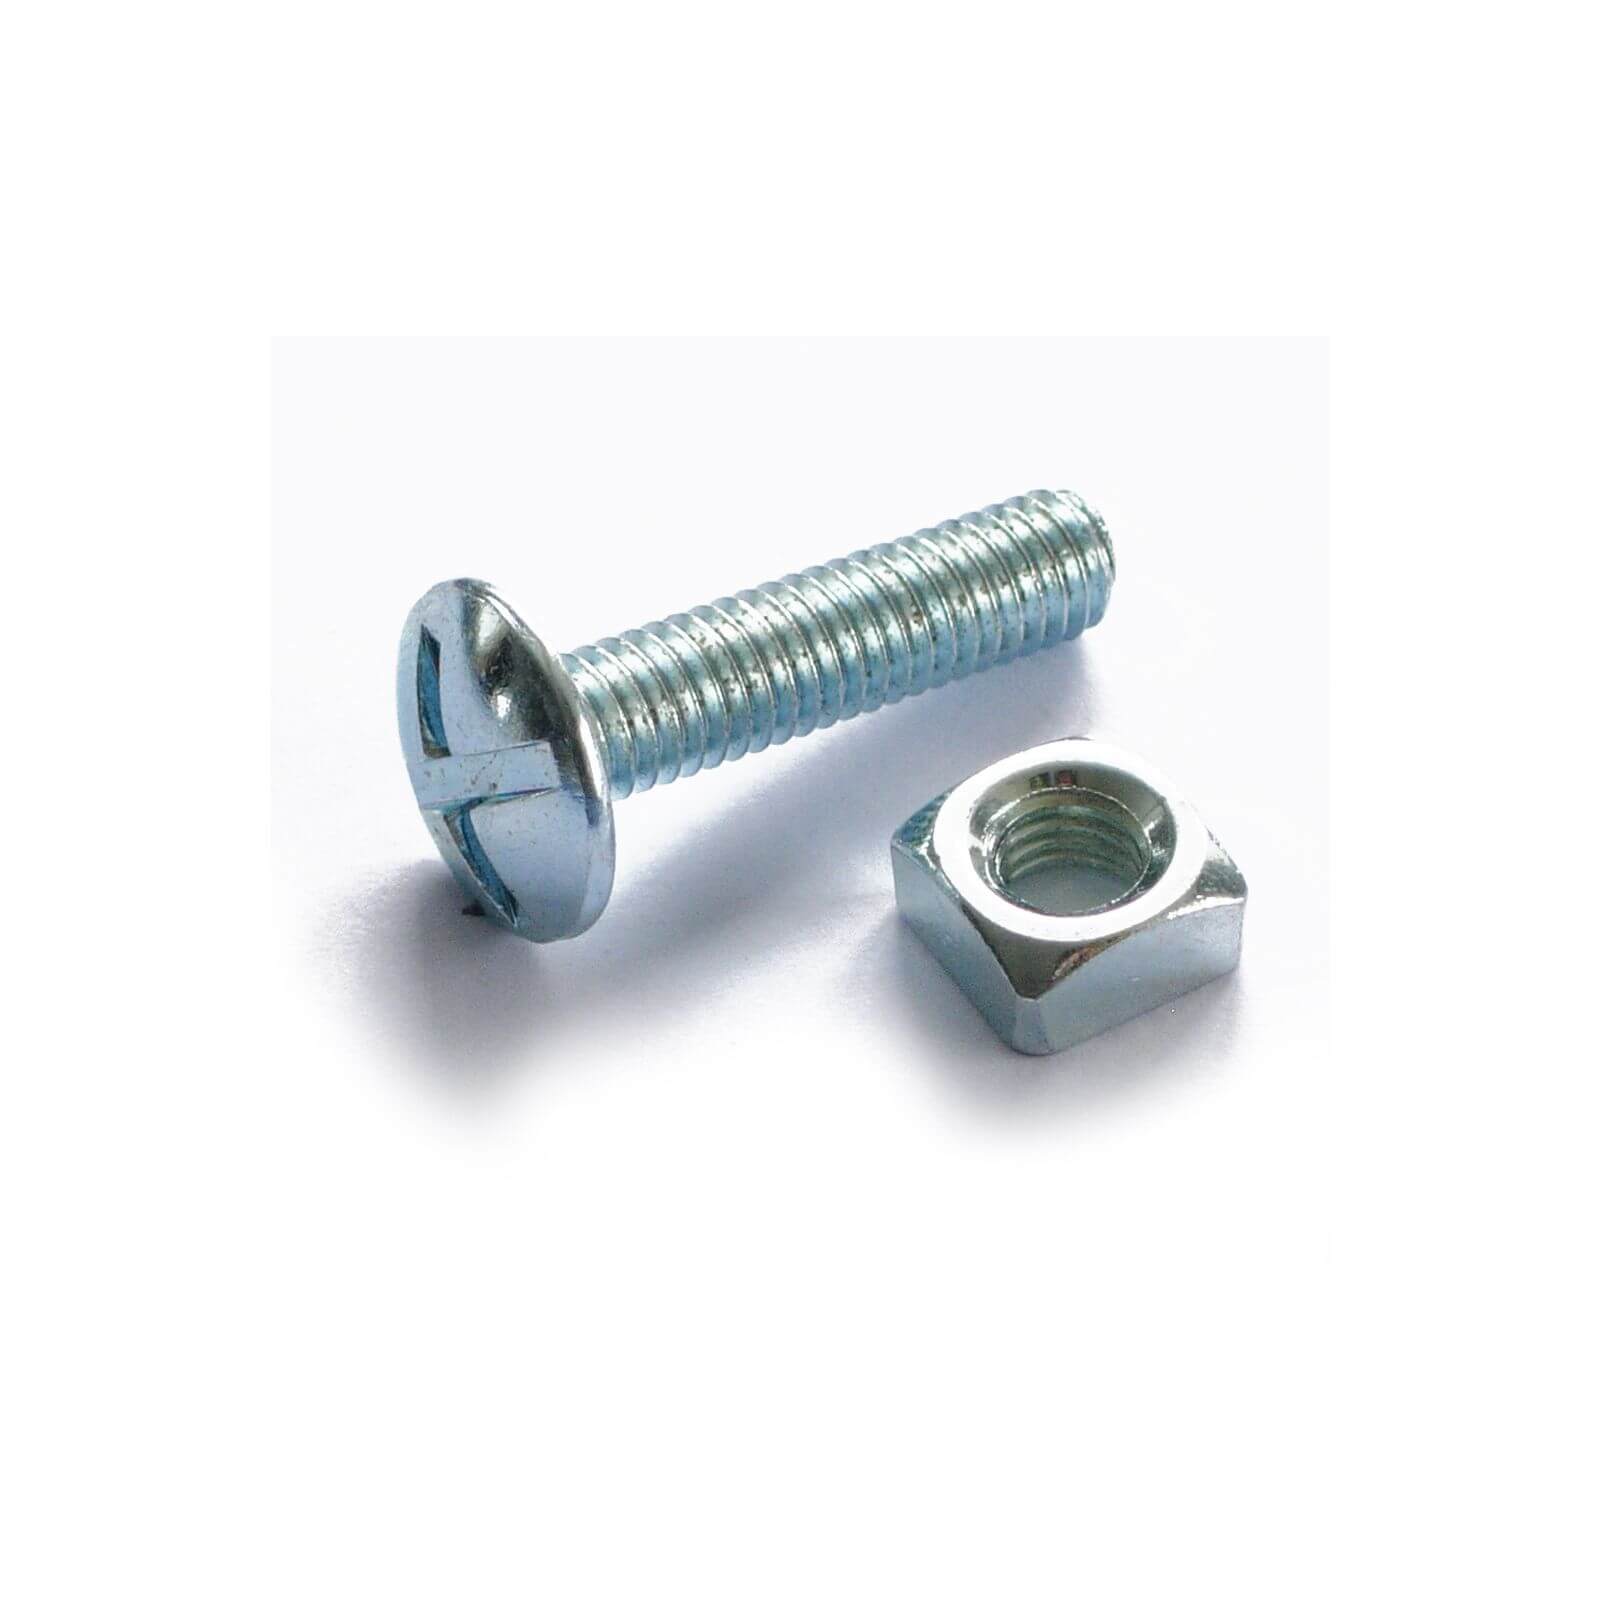 Roofing Bolt - Bright Zinc Plated - M8 75mm - 5 Pack